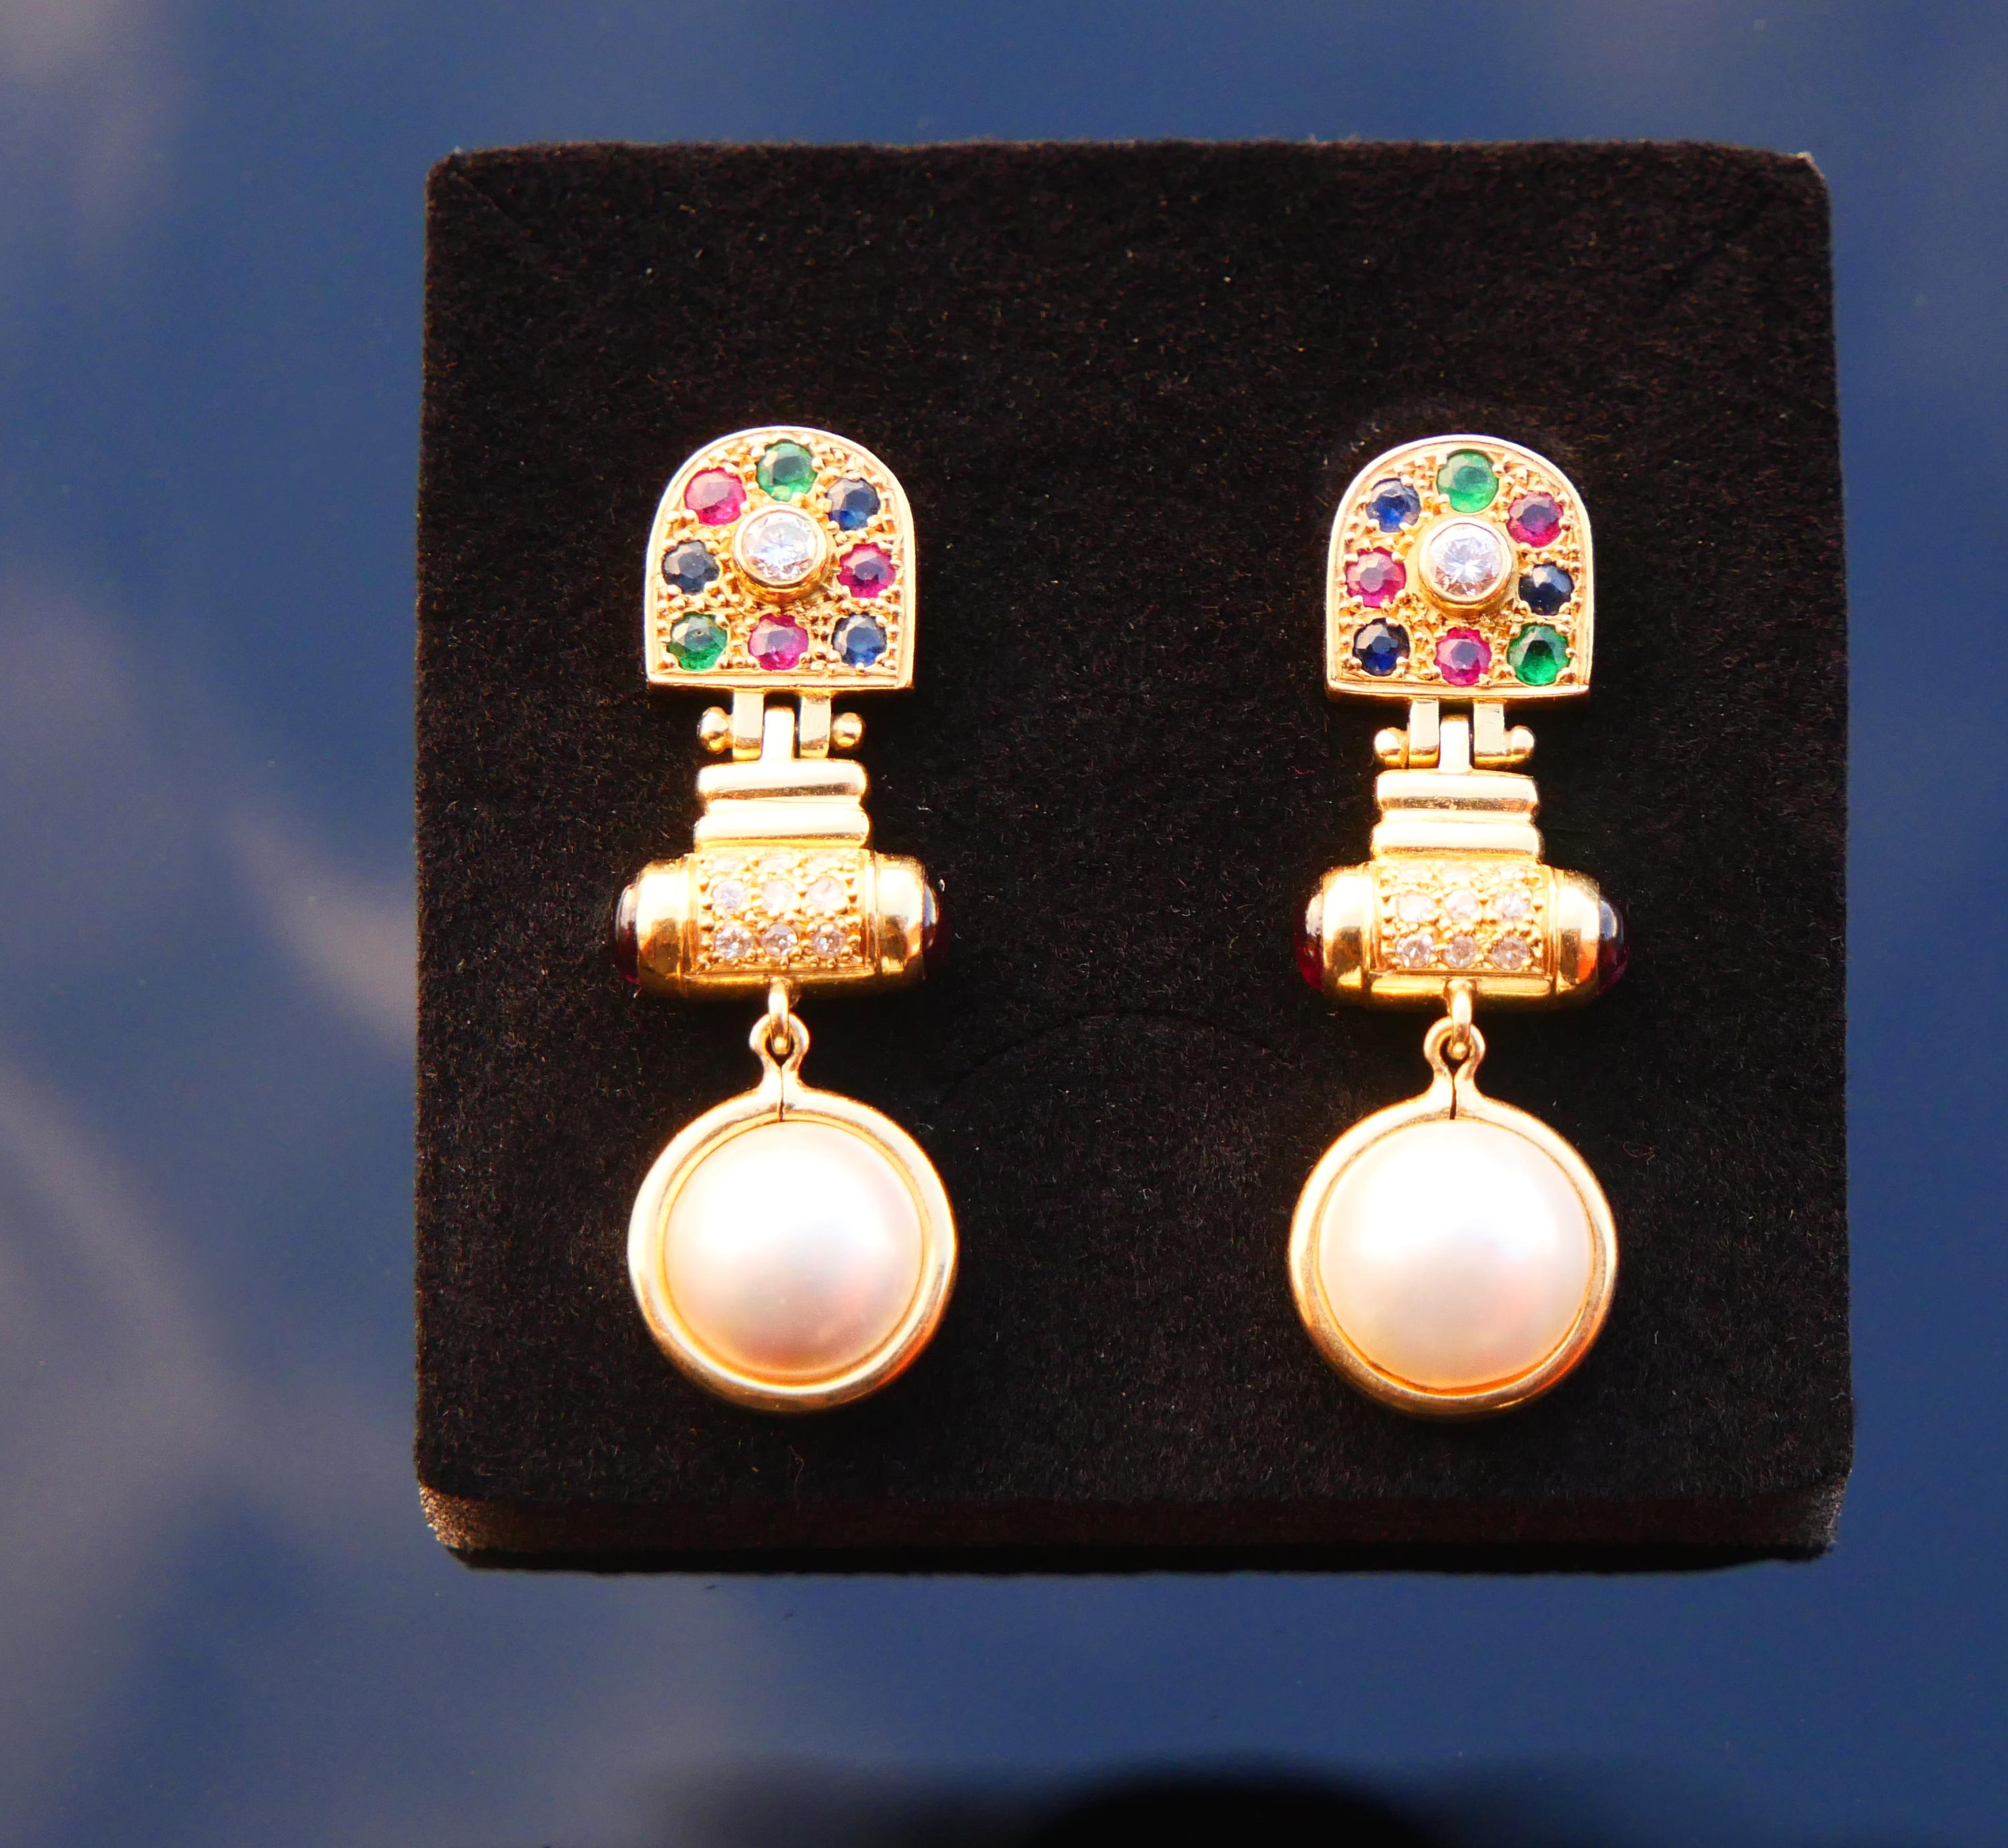 
A pair of amazing vintage earrings from ca. 1970s in tested solid 18K Yellow Gold. Each earring is built of three hinged and mobile sections decorated with natural Diamonds, Rubies, Sapphires, Emeralds, Tourmalines and Mabe Pearls .

Each earring